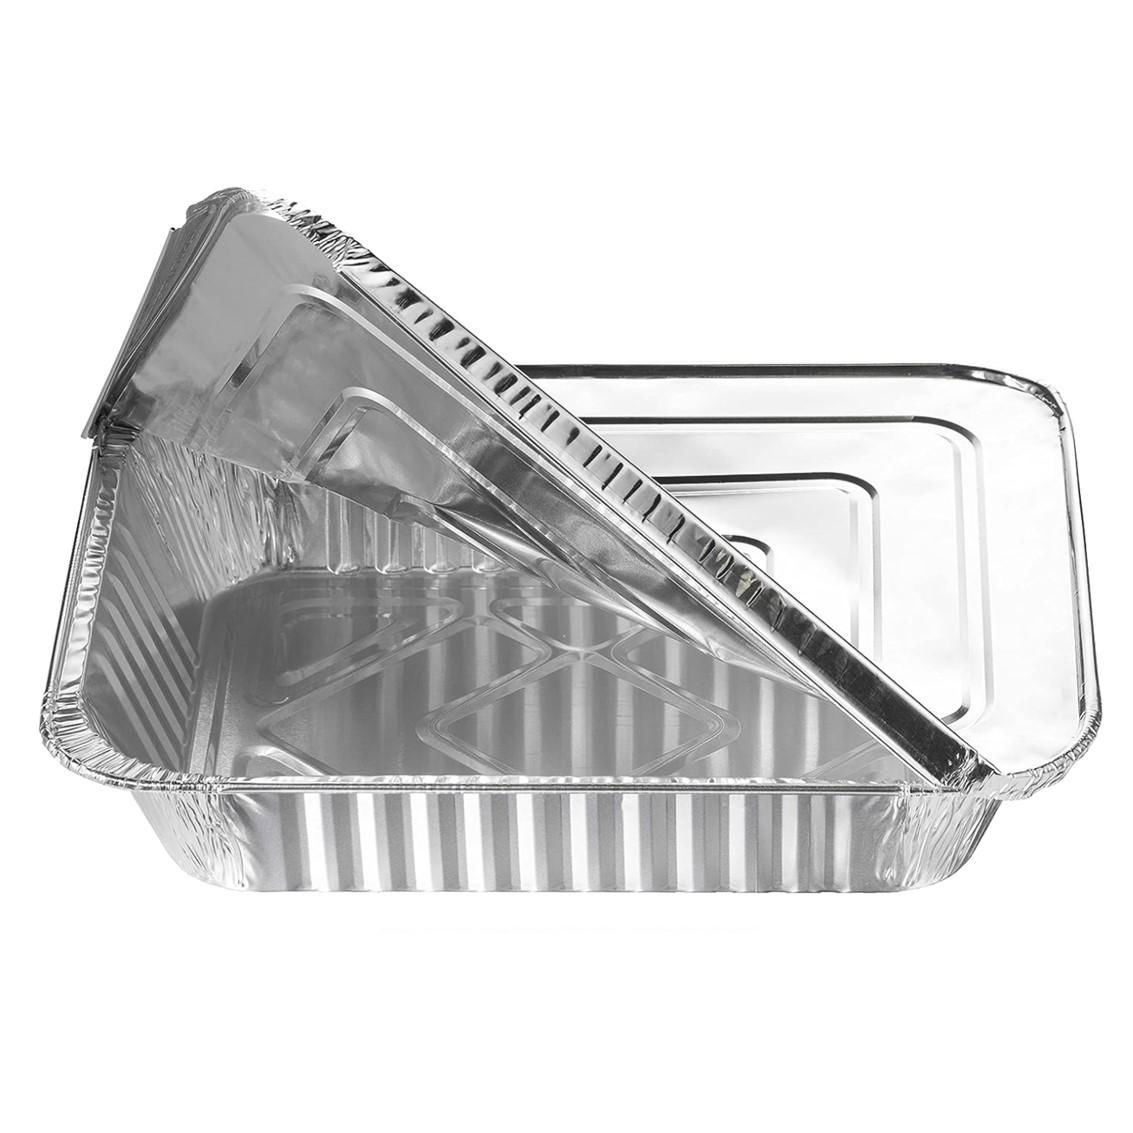 High thermal conductivity aluminum pan/foil food container/ container with lid 2